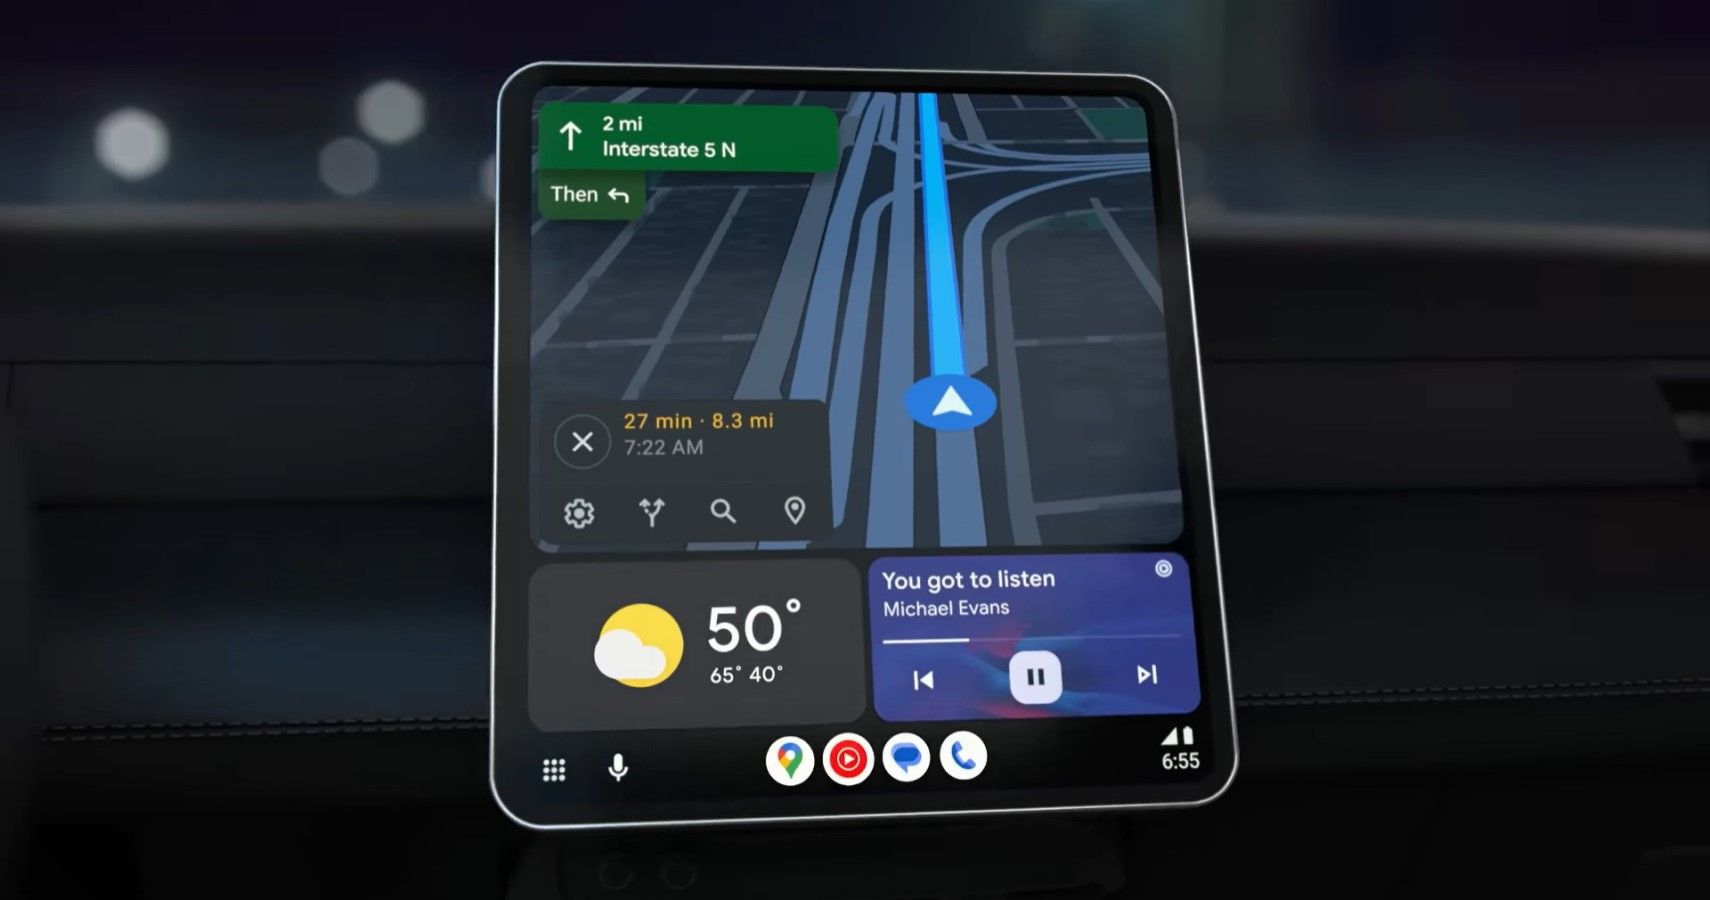 All-new Android Auto with Tesla-type screen layout